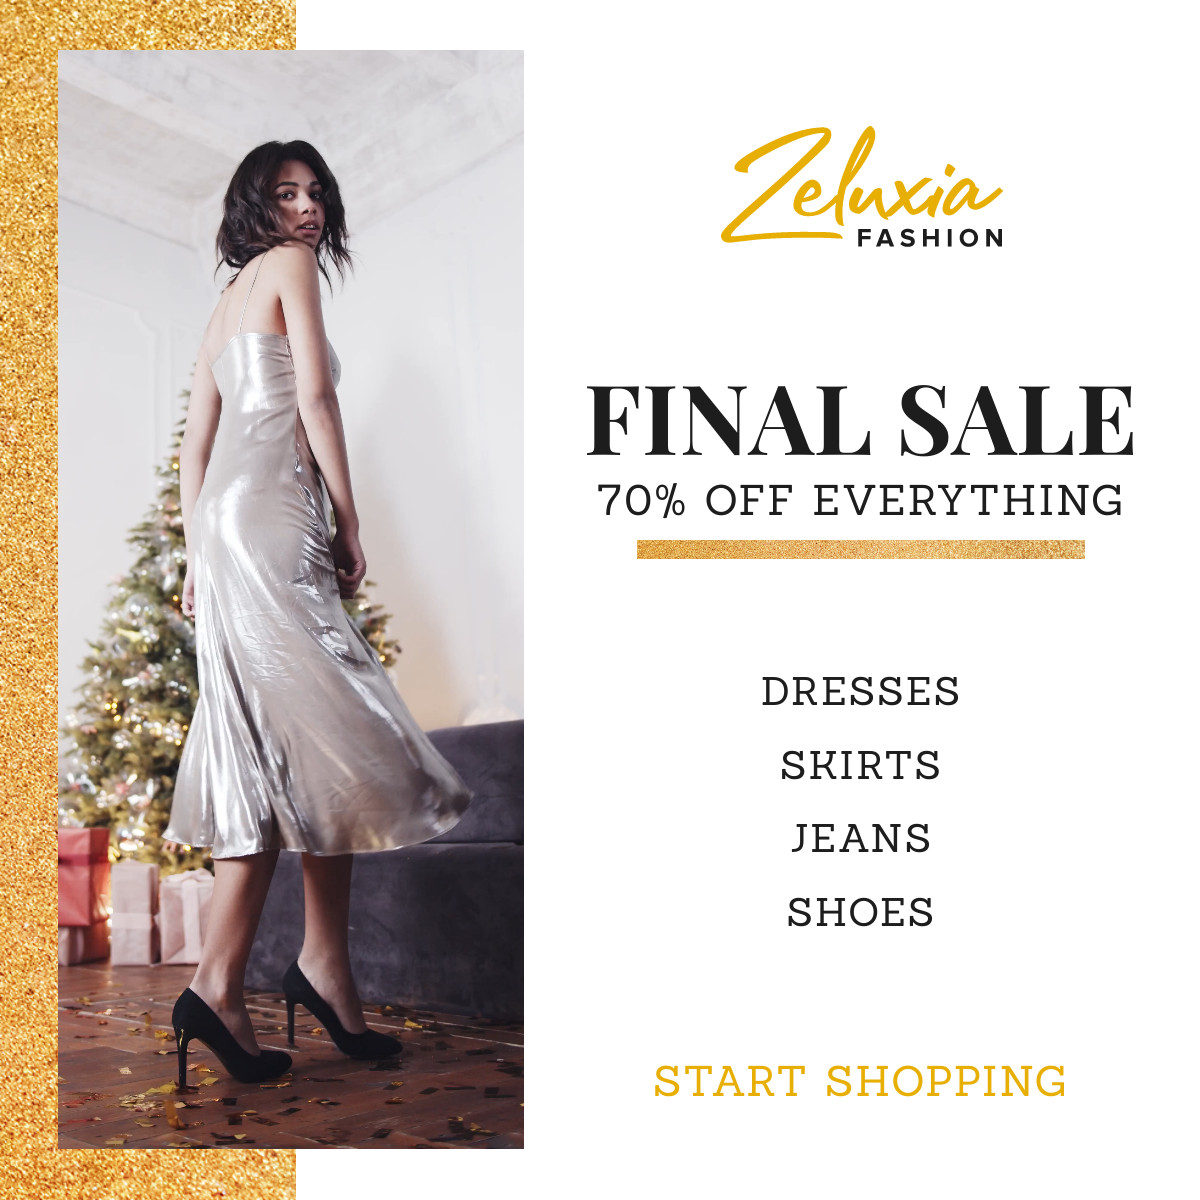 Golden Christmas Final Sale Fashion Video Facebook Video Cover 1250x463